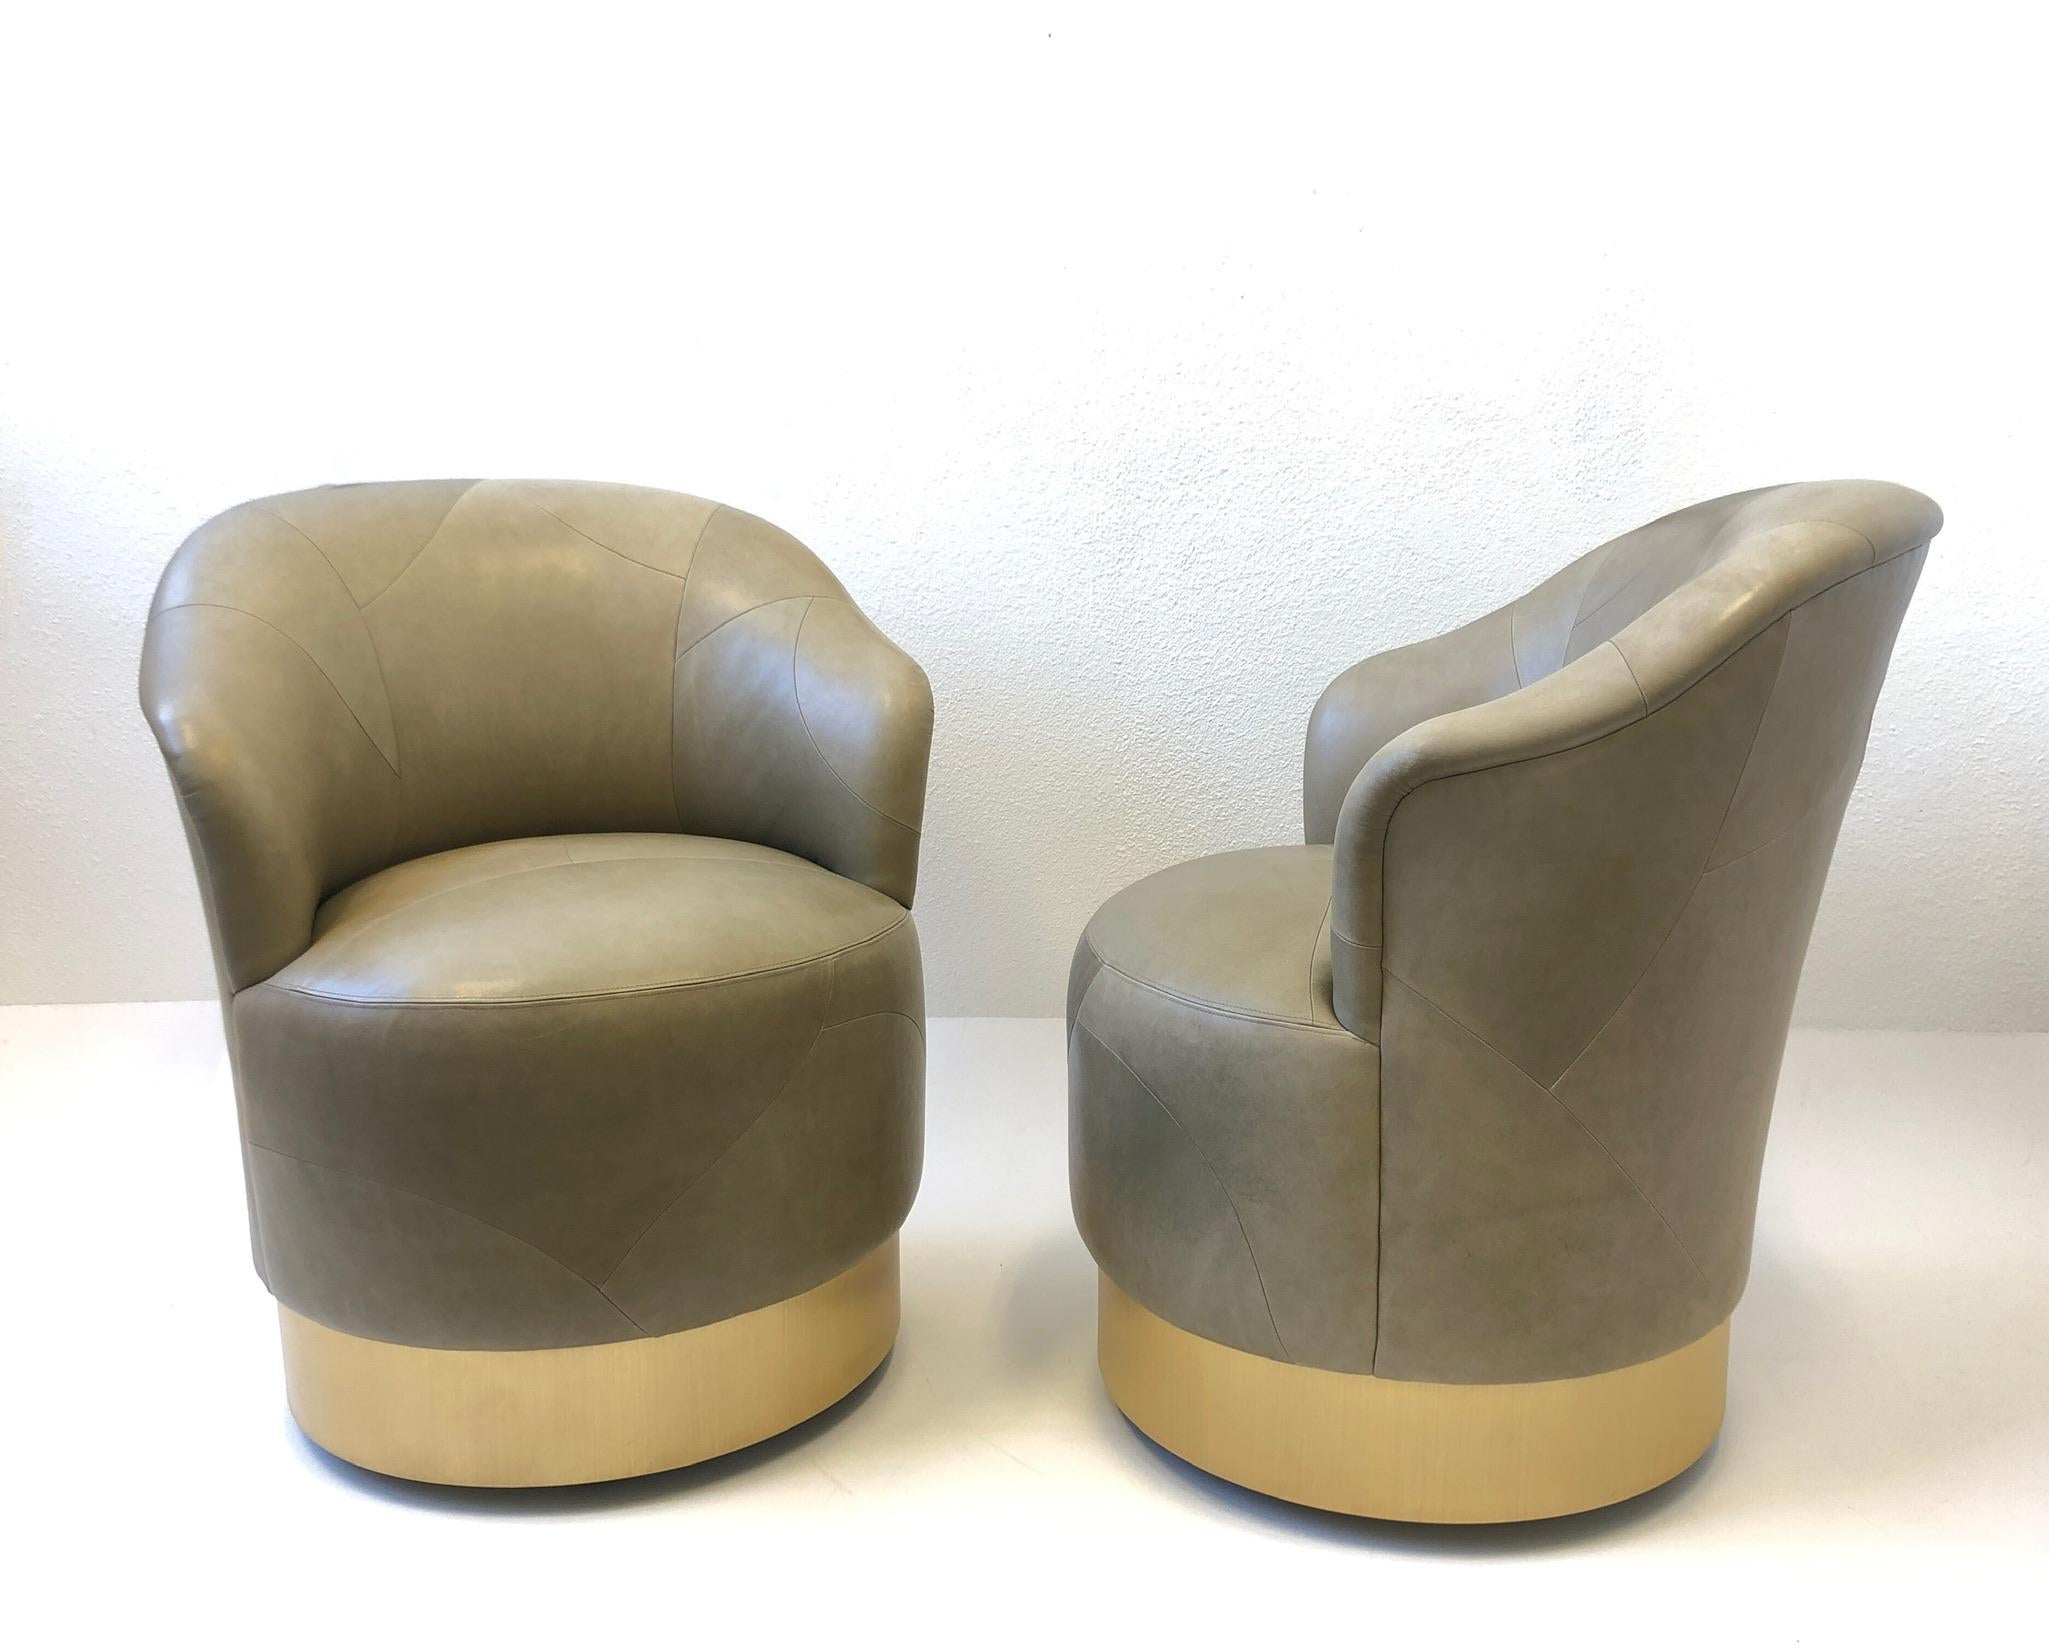 Beautiful pair of patchwork leather chairs with a brushed brass base designed by Sally Sirkin Lewis for J. Robert Scott in the 1980’s. Original dark khaki distressed leather. 
They show minor wear consistent with age. The chairs swivel and are on